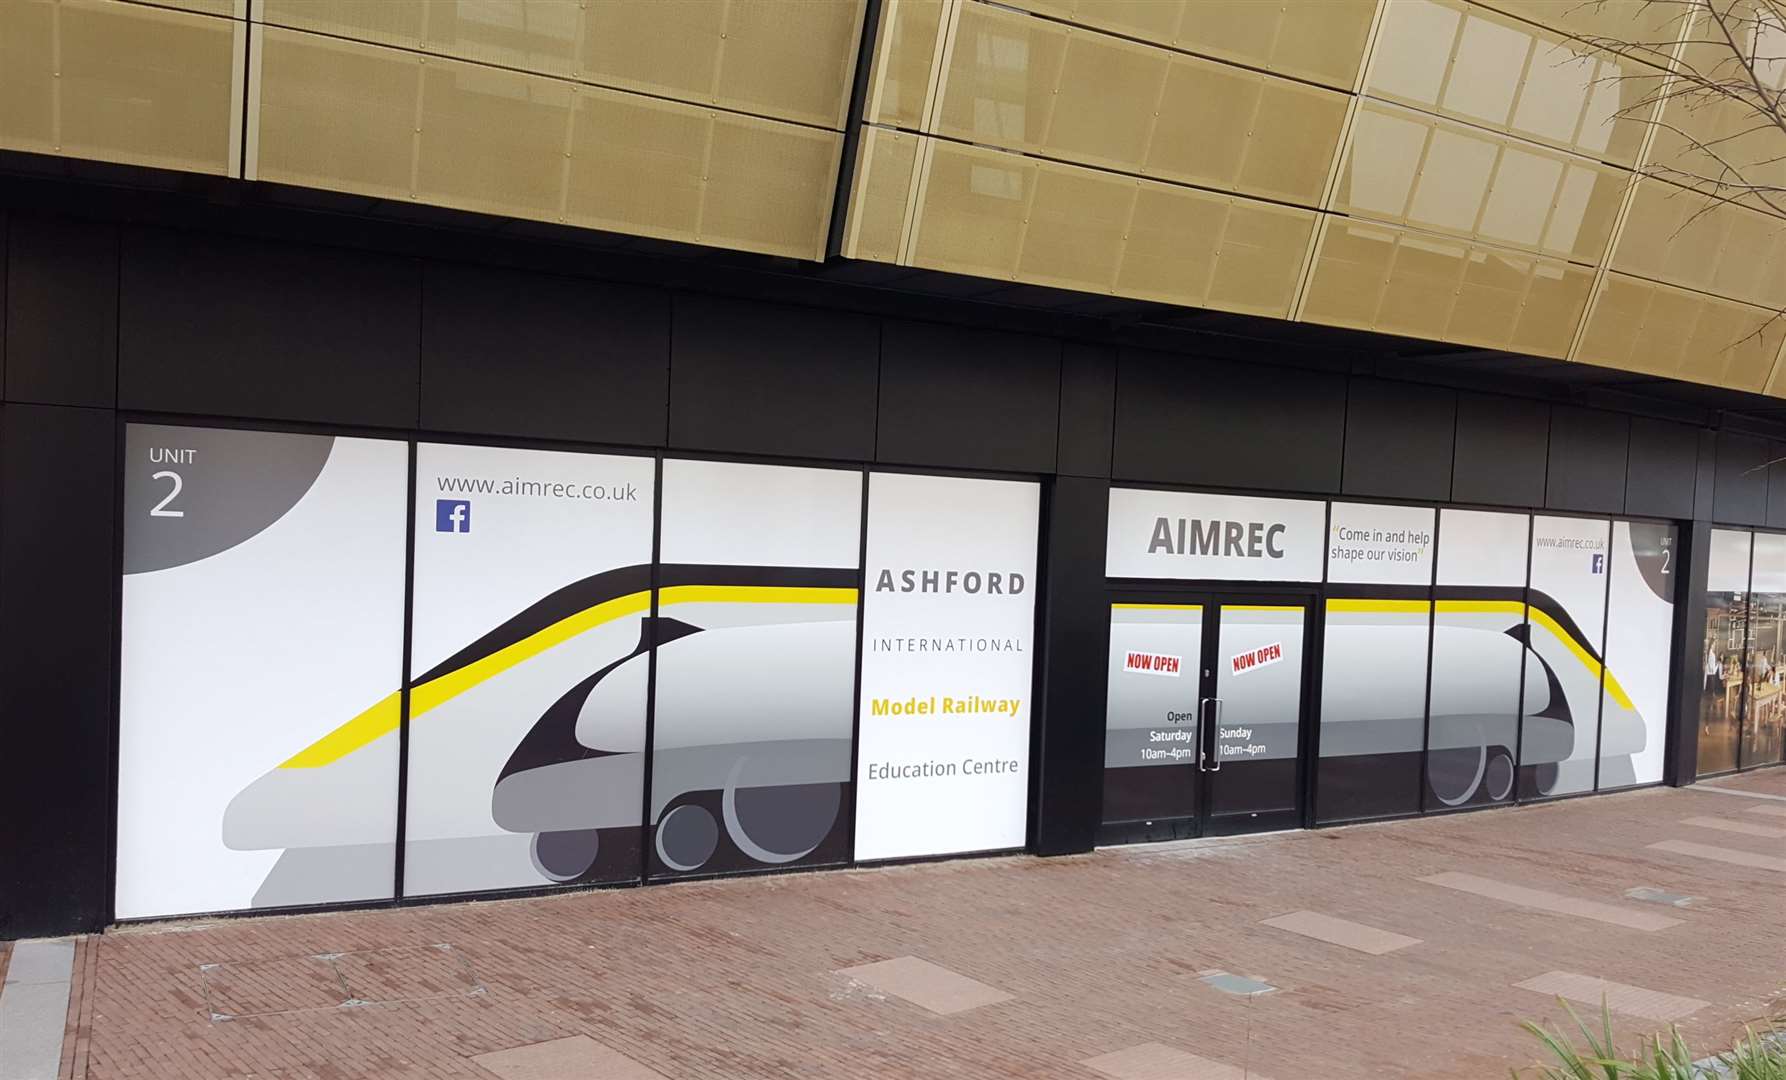 AIMREC opened at Elwick Place in December